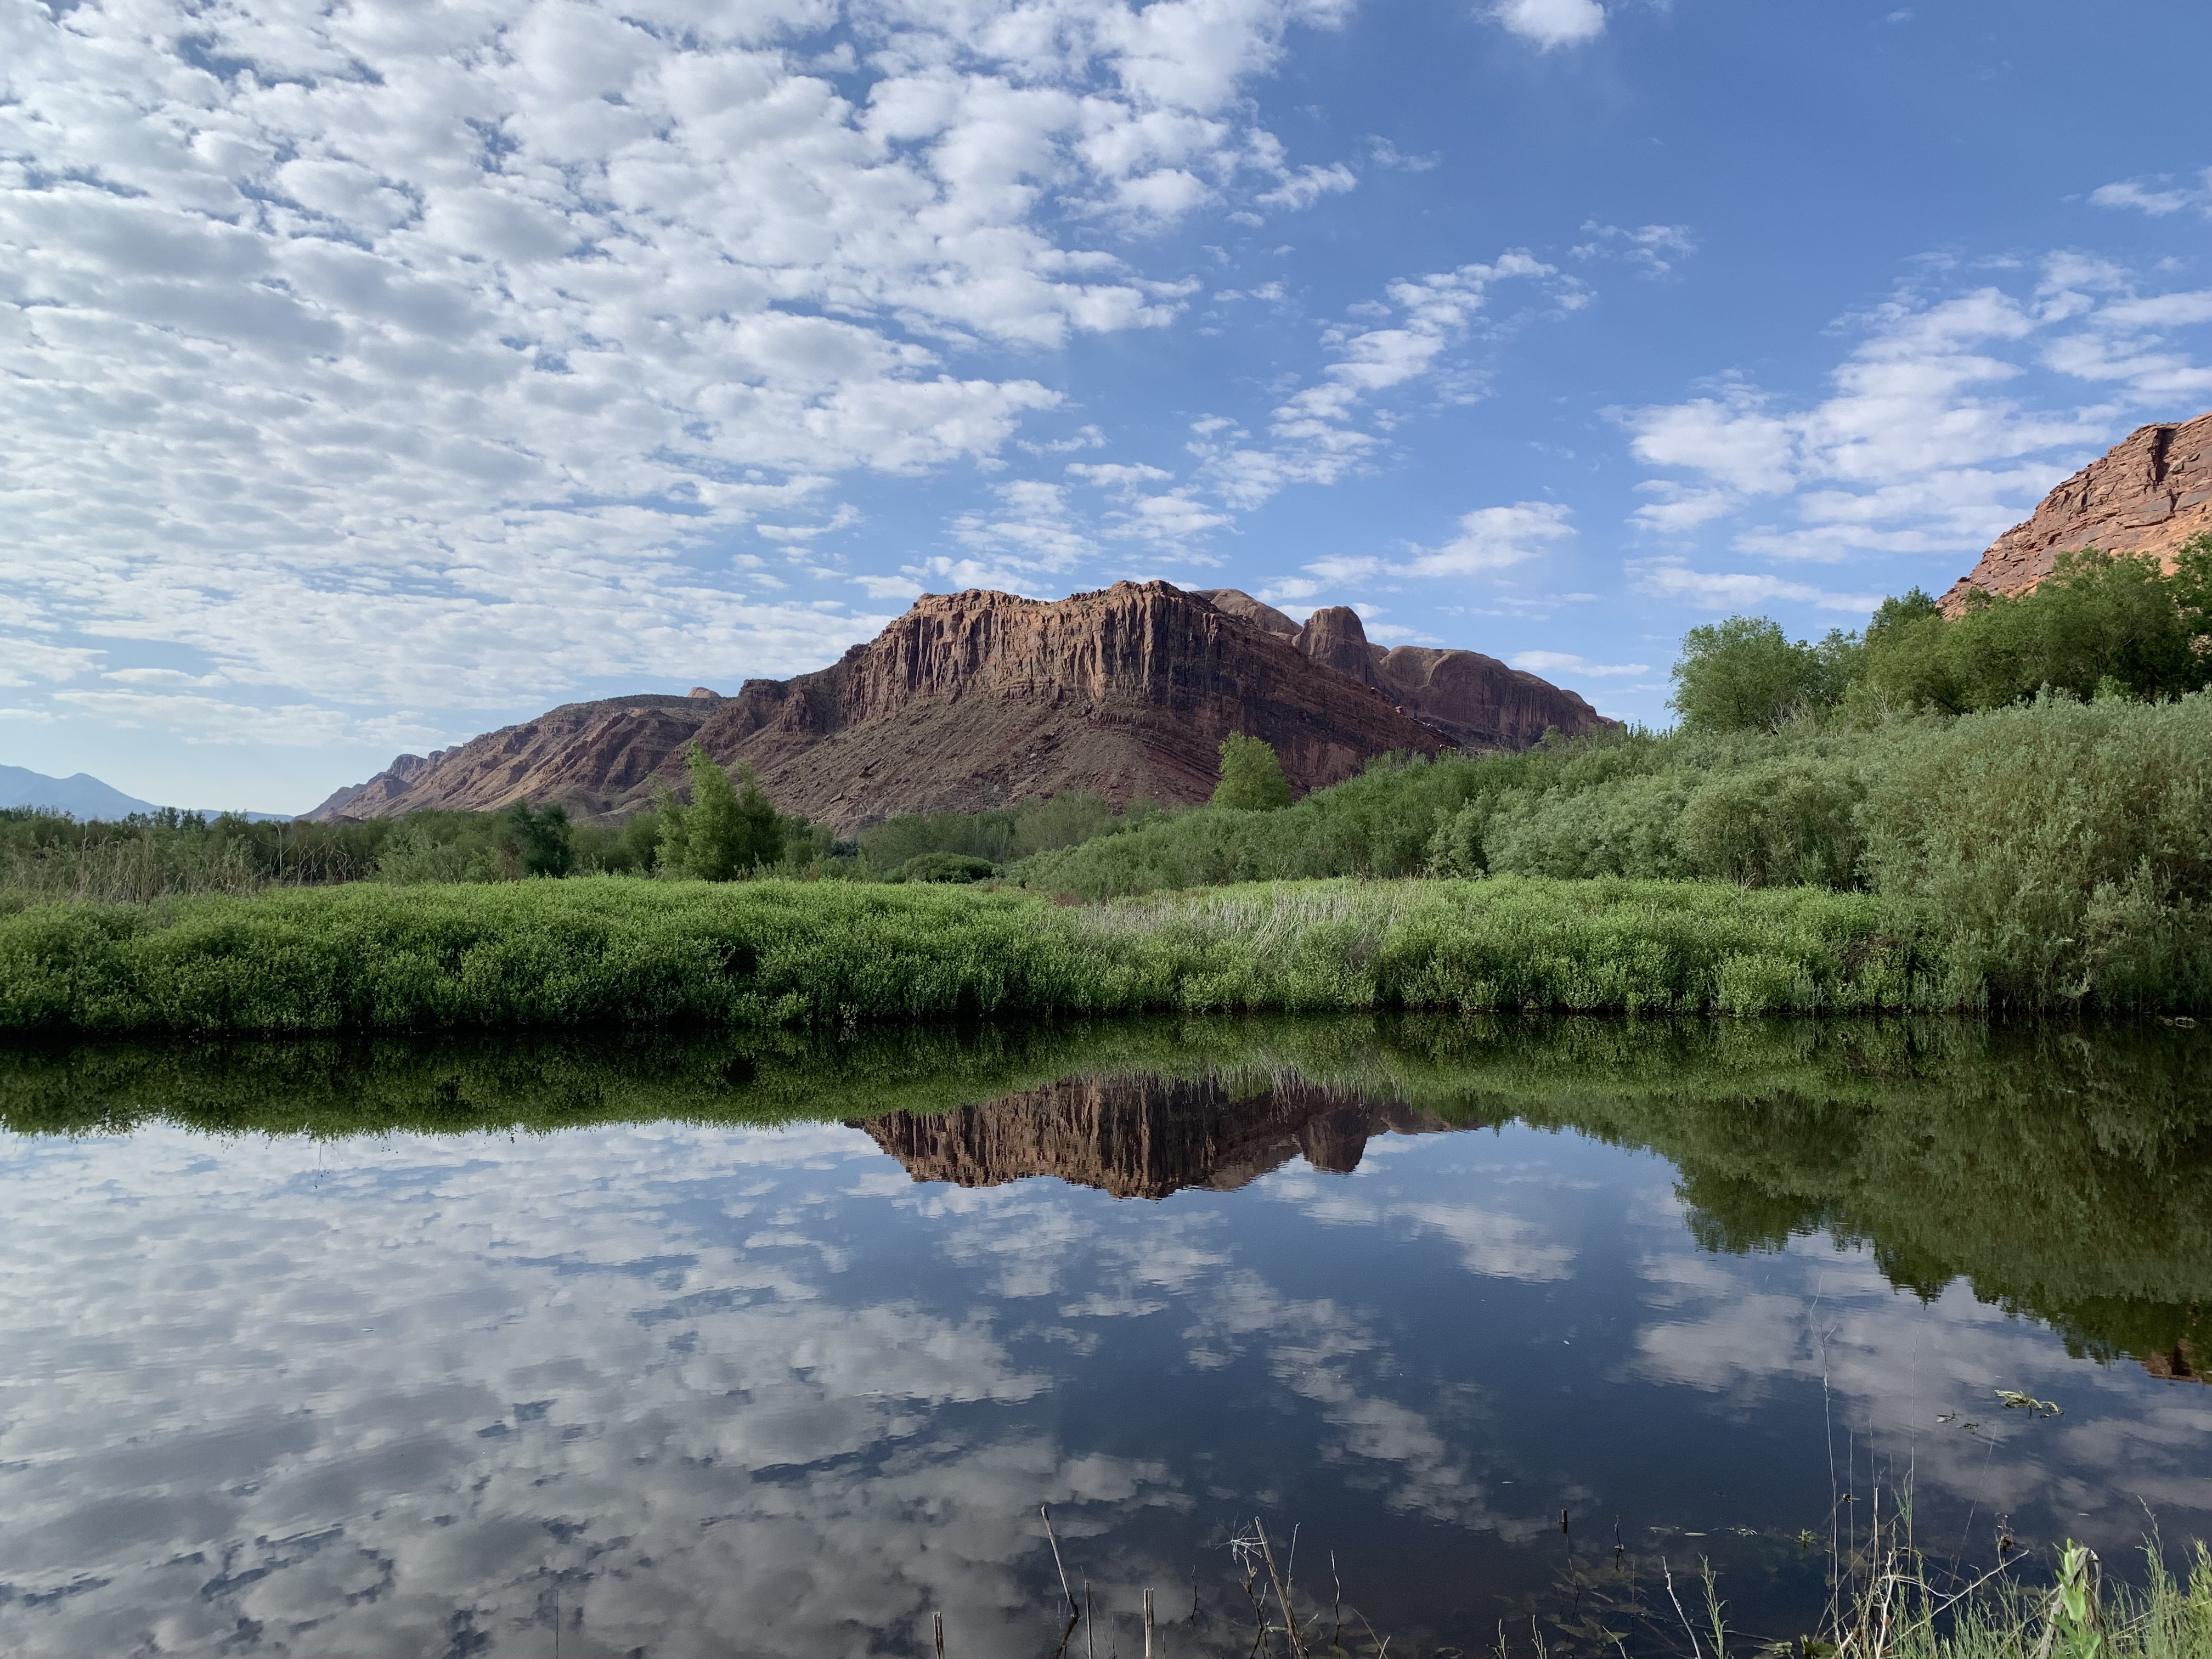 View of a red-rock mesa in the distance with a flat body of water in the foreground and white puffy clouds in a blue sky that is reflected in the calm water.